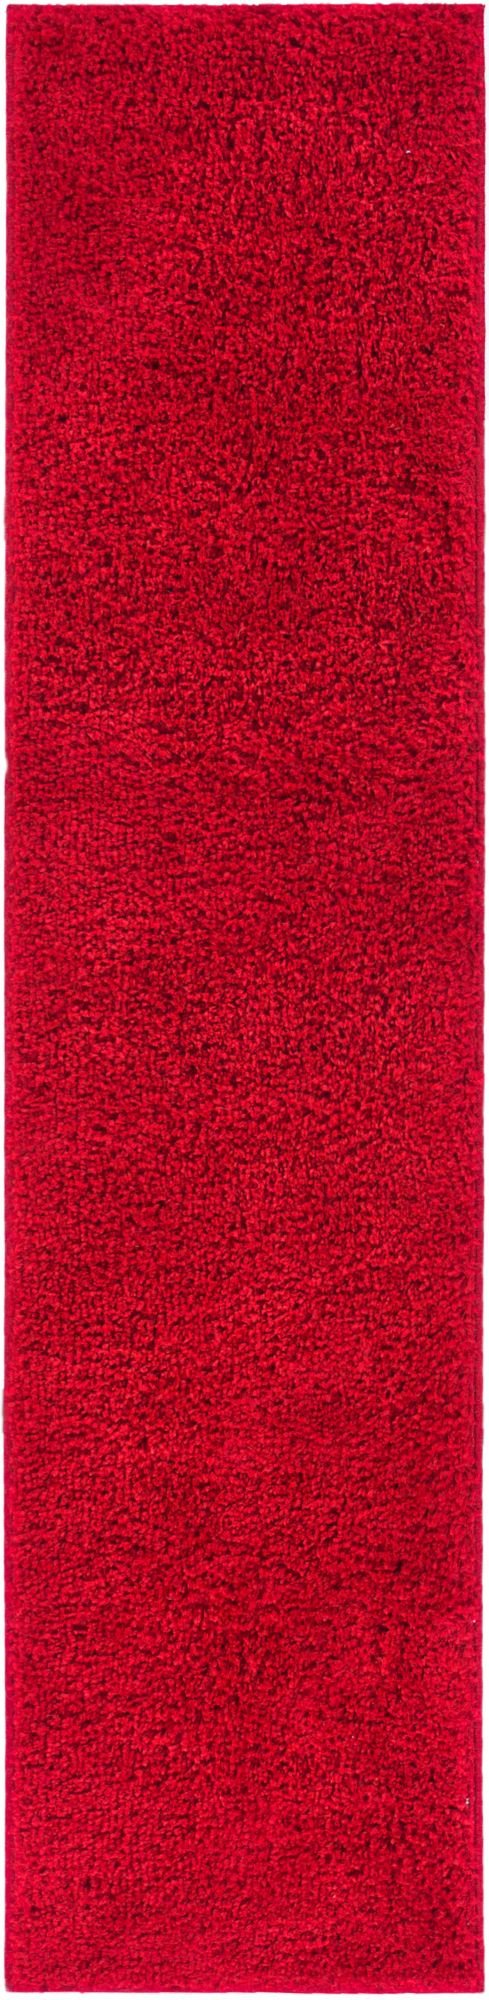 Plain Red Solid Rug 7040